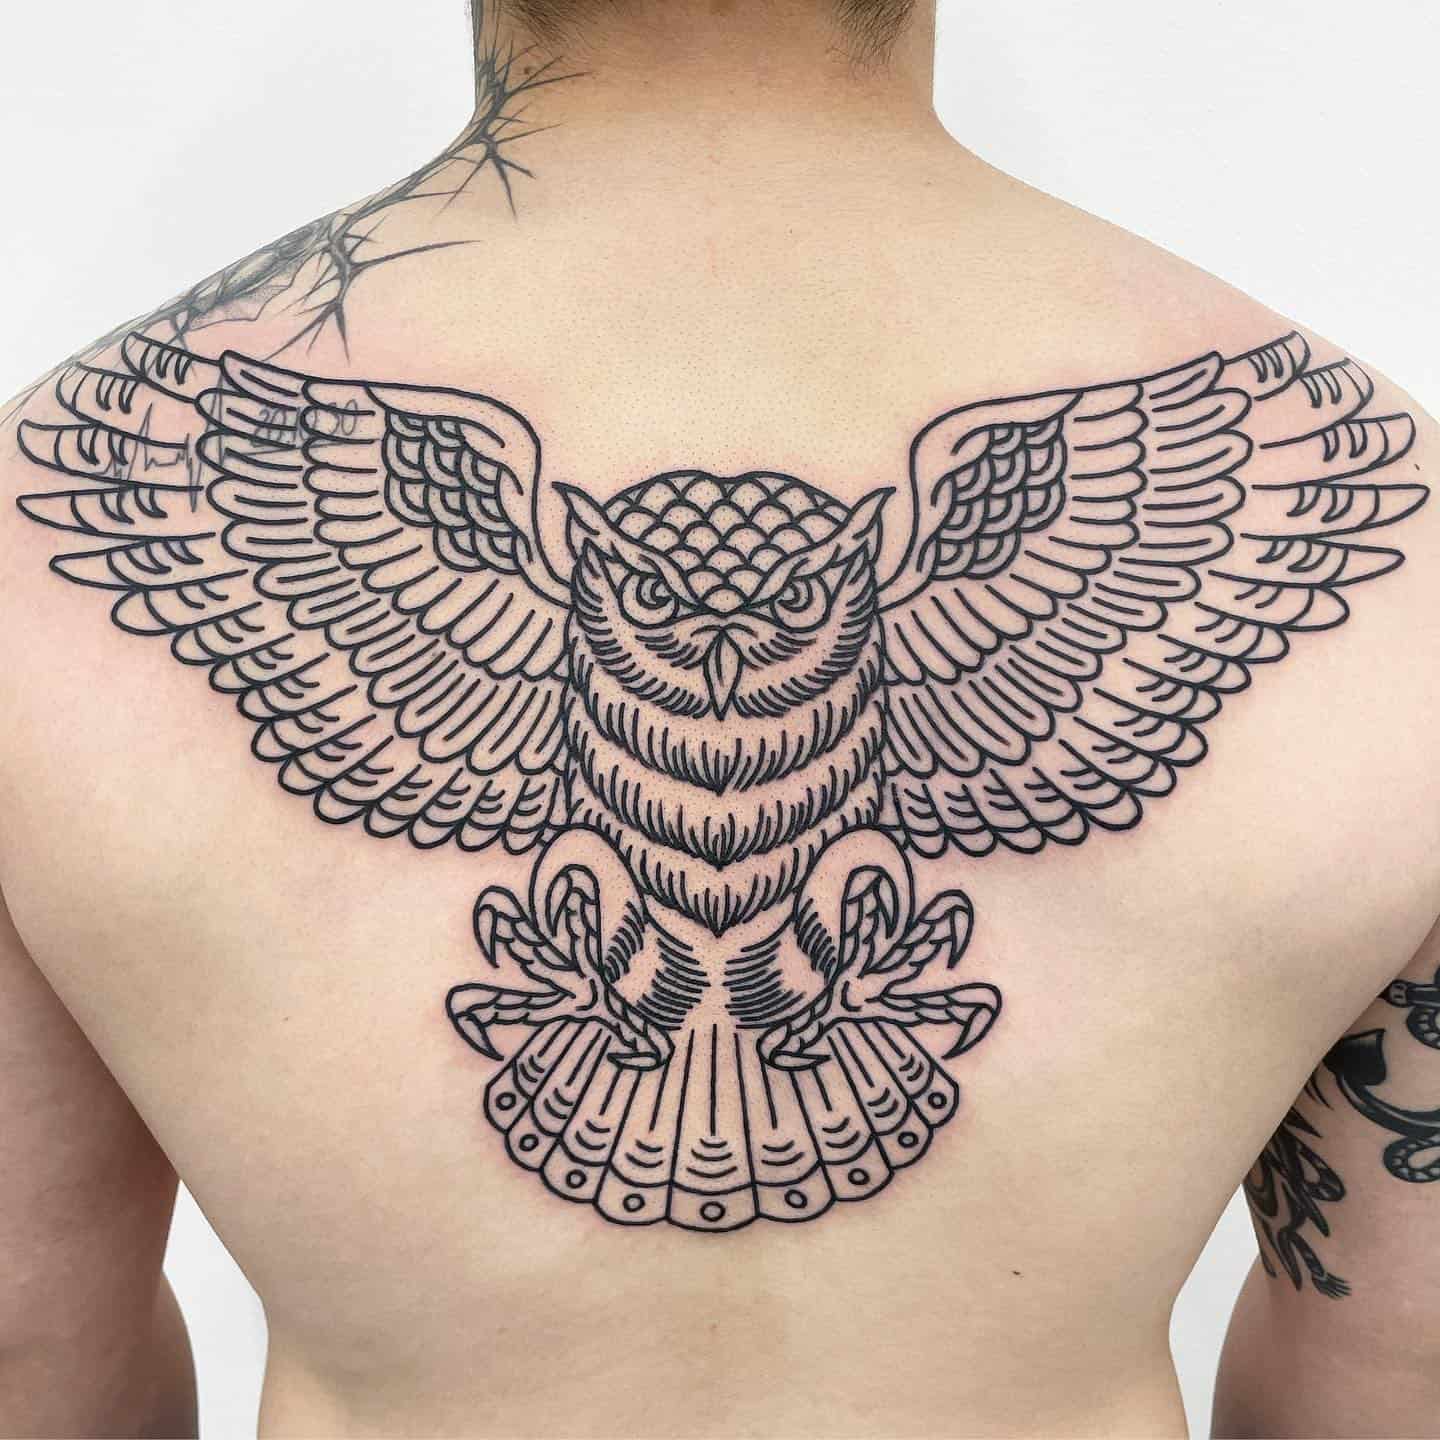 Owl chest tattoo,black and grey - George Drone by Drone80 on DeviantArt